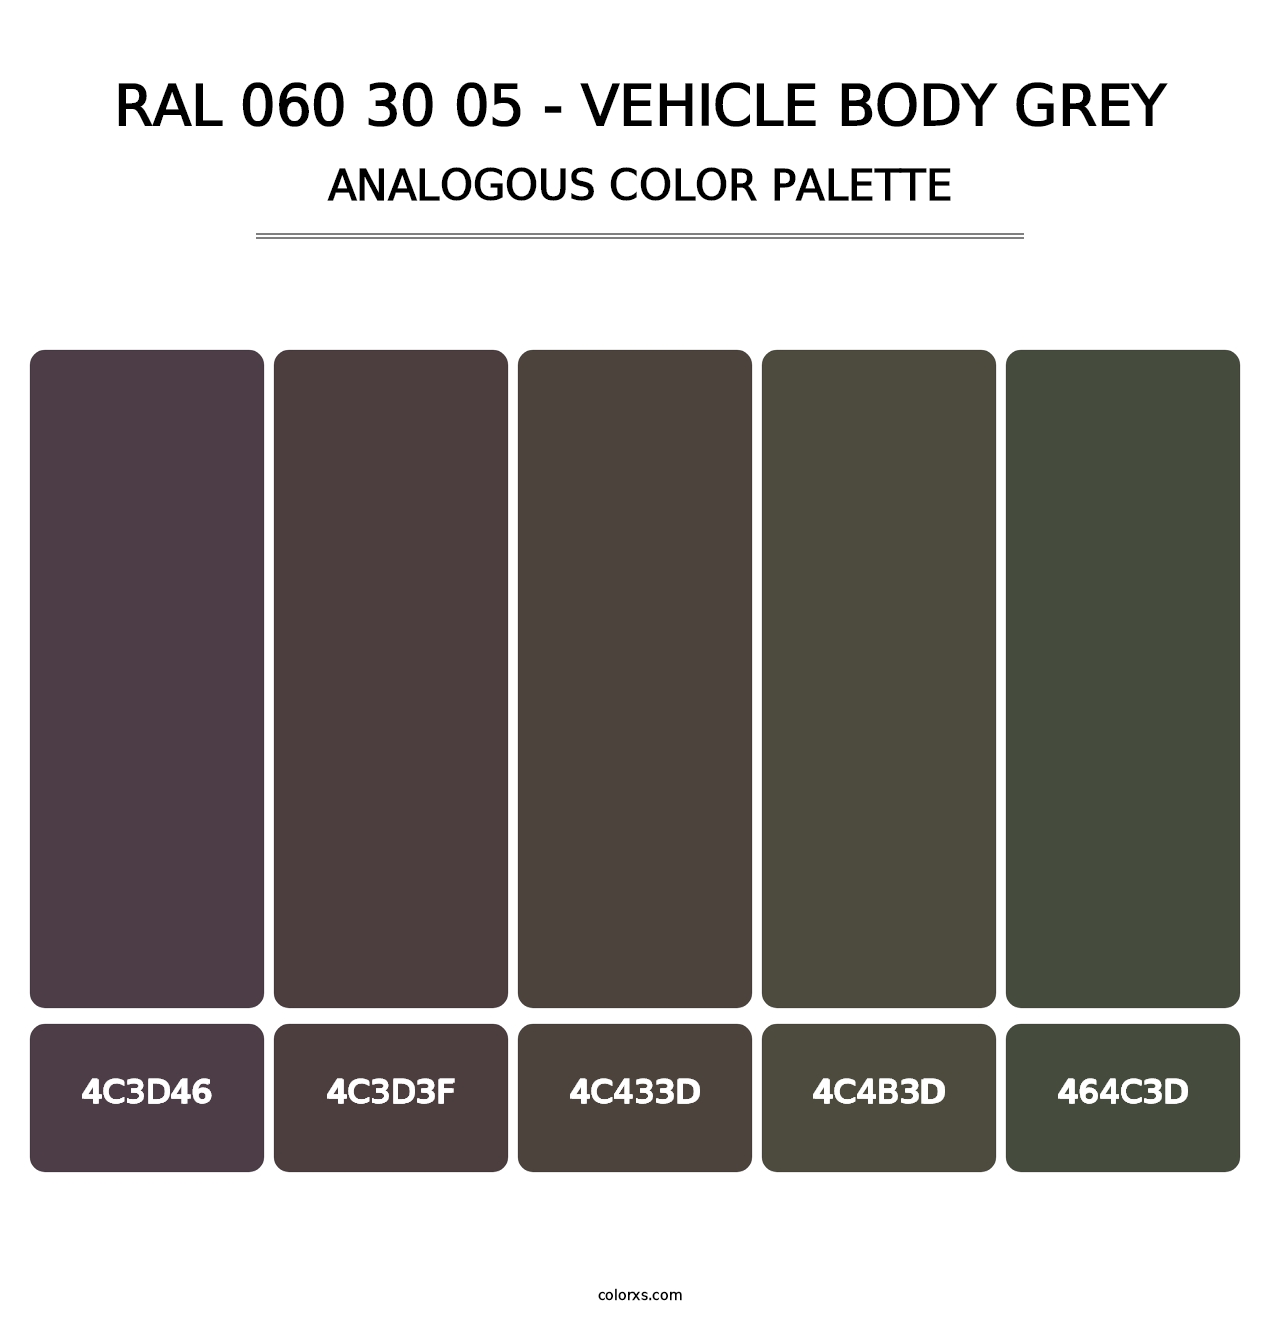 RAL 060 30 05 - Vehicle Body Grey - Analogous Color Palette